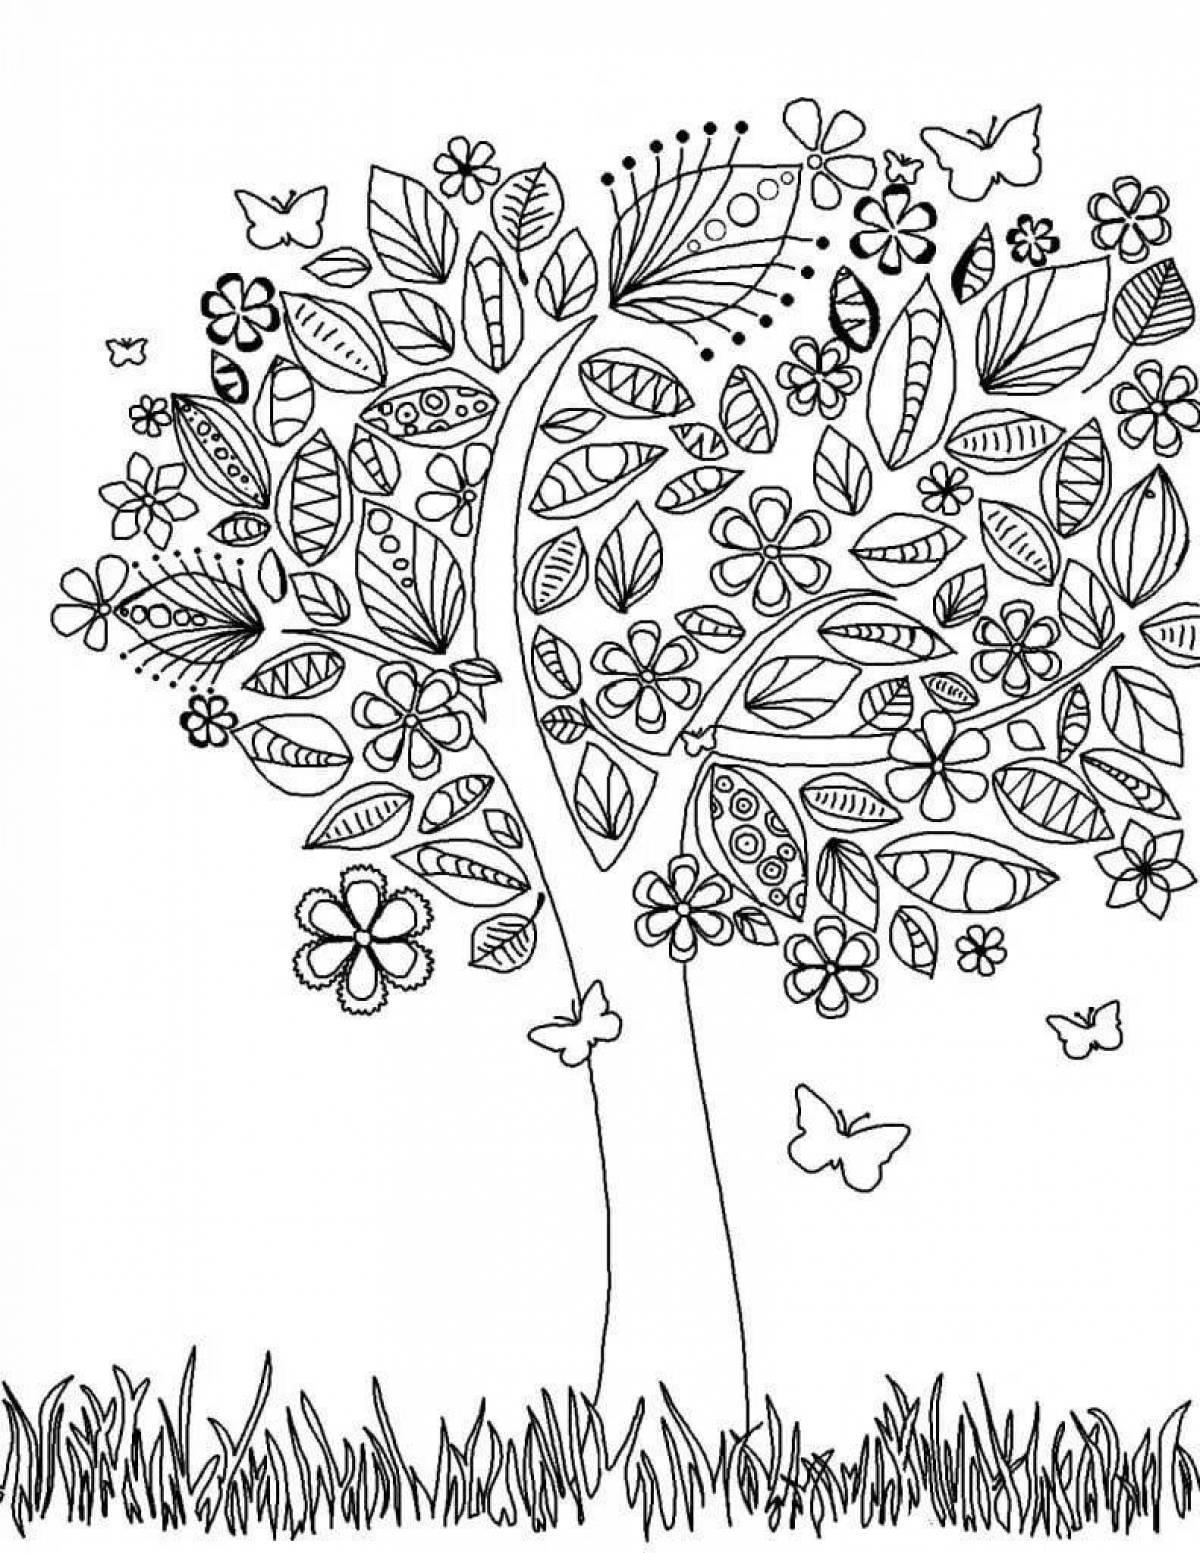 Exciting spring anti-stress coloring book